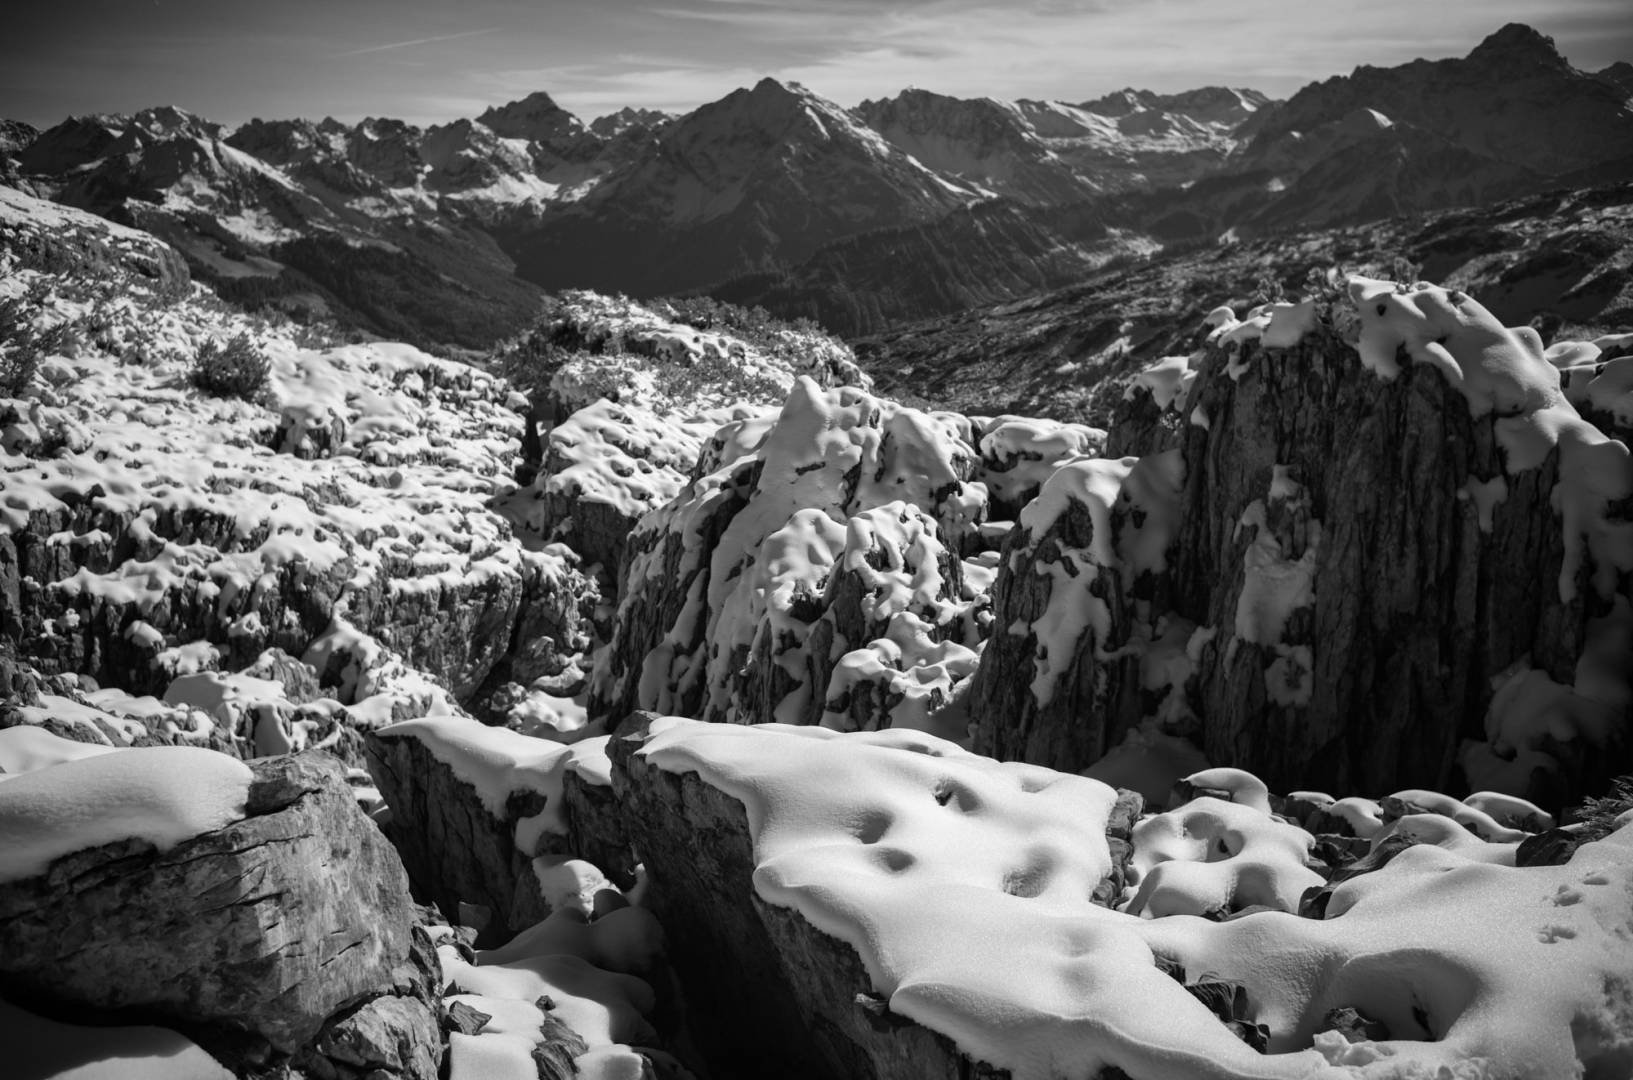 Gottesackerplateau, Kleinwalsertal. Leica M10-M with 35mm Summilux 1/125s f/2.8 ISO 1600 Infrared Filter 715